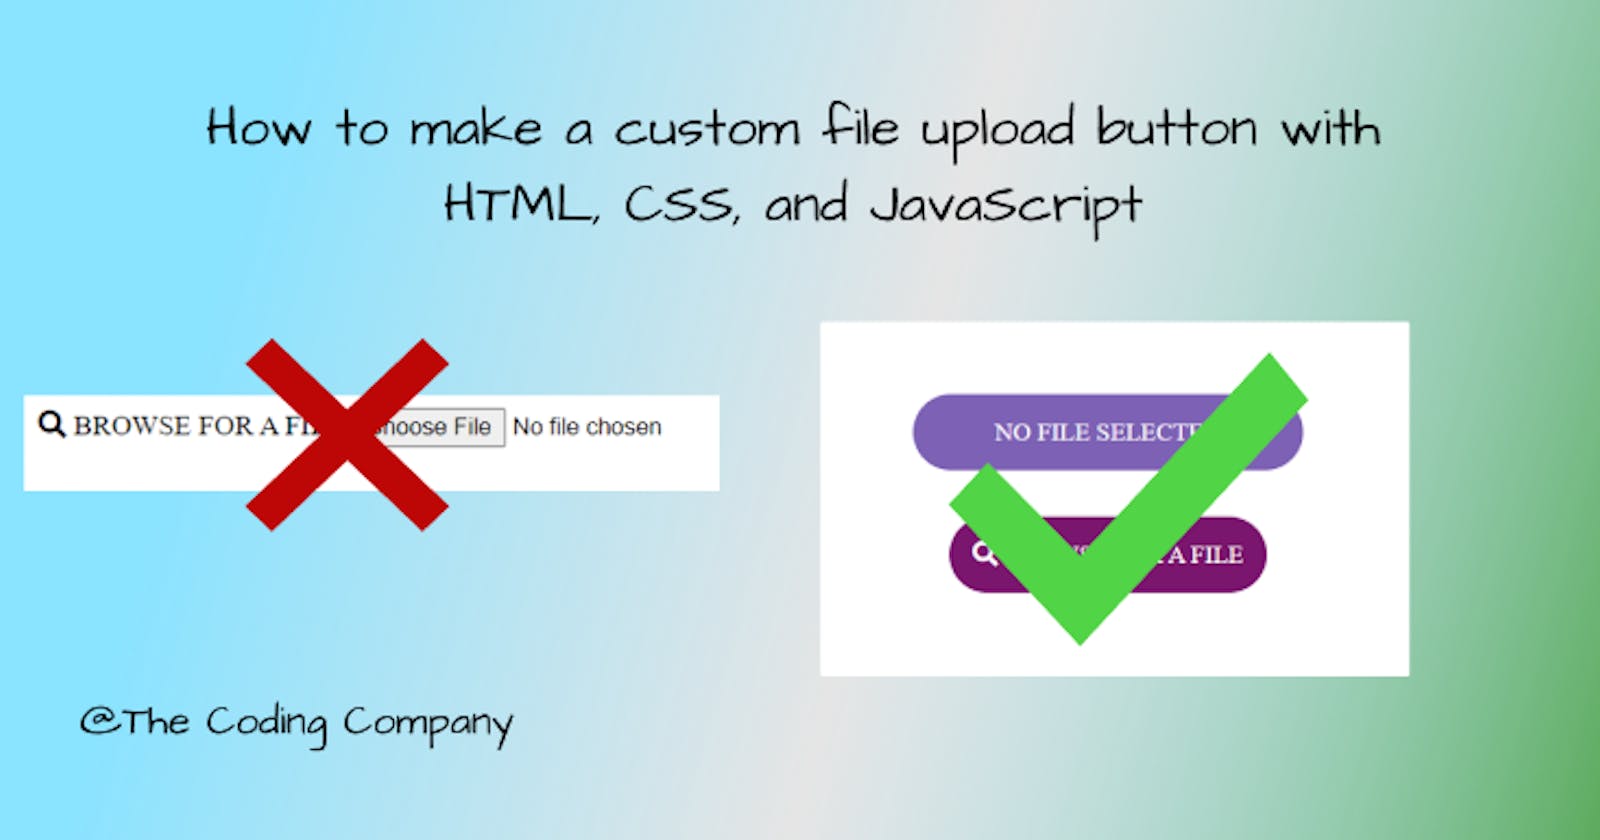 How to make a custom file upload button with HTML, CSS, and JavaScript